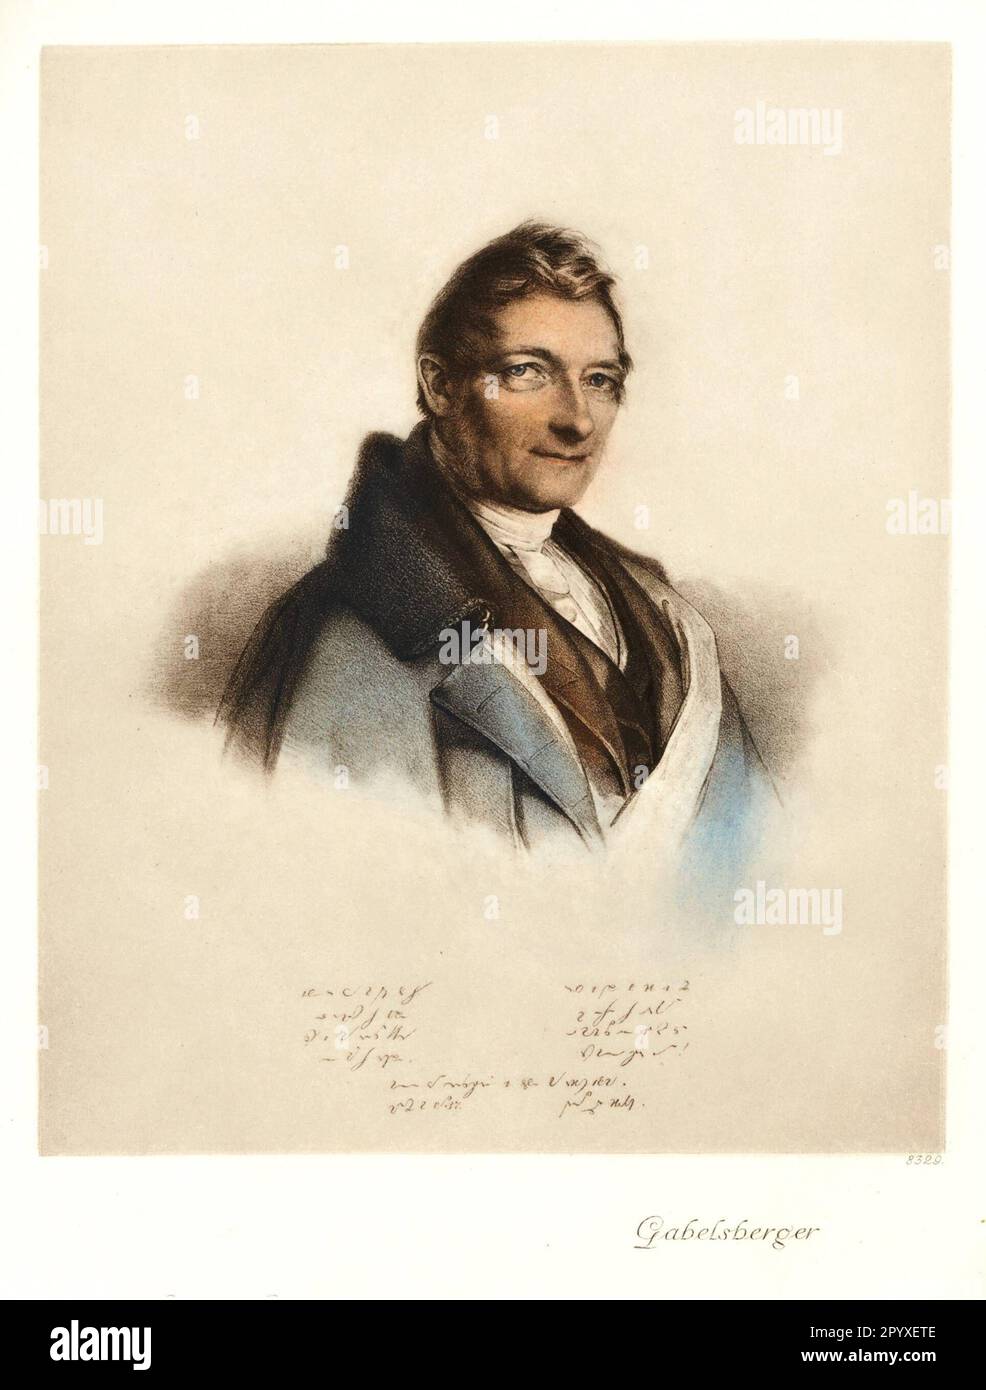 Franz Xaver Gabelsberger (1789-1849), German stenographer and inventor. Gabelsberger created the first cursive shorthand based on German script. Lithograph. Photo: Heliogravure, Corpus Imaginum, Hanfstaengl Collection. [automated translation] Stock Photo